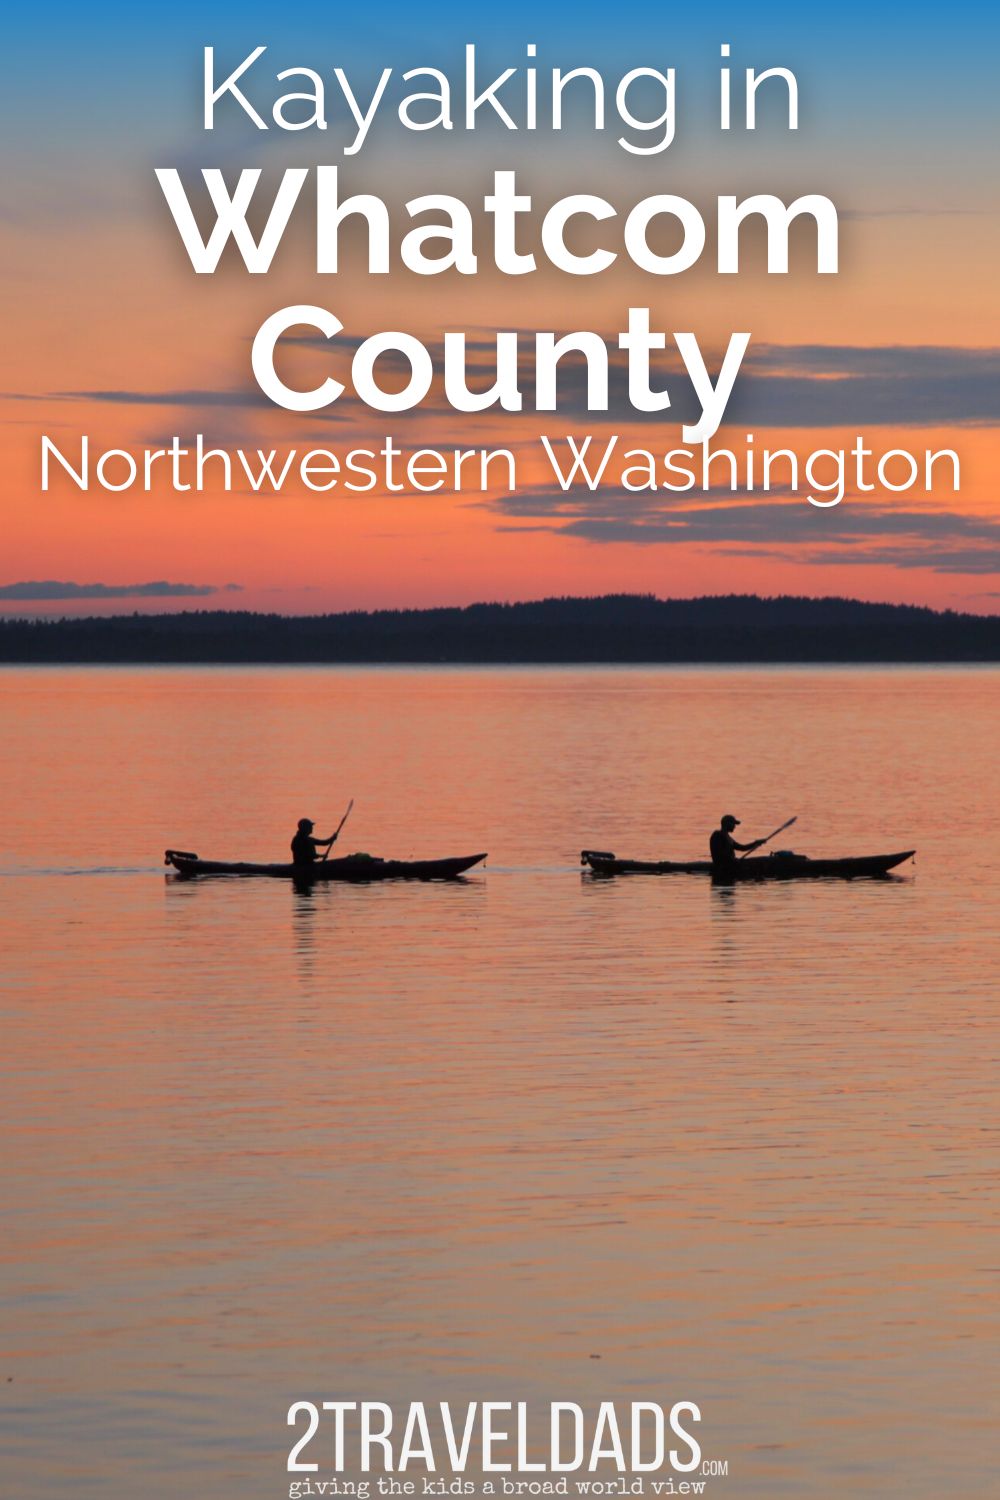 Bellingham and Whatcom County have tons of great places to kayak. From Lake Whatcom to Birch Bay, the Northern Puget Sound is a beautiful summer kayaking destination.